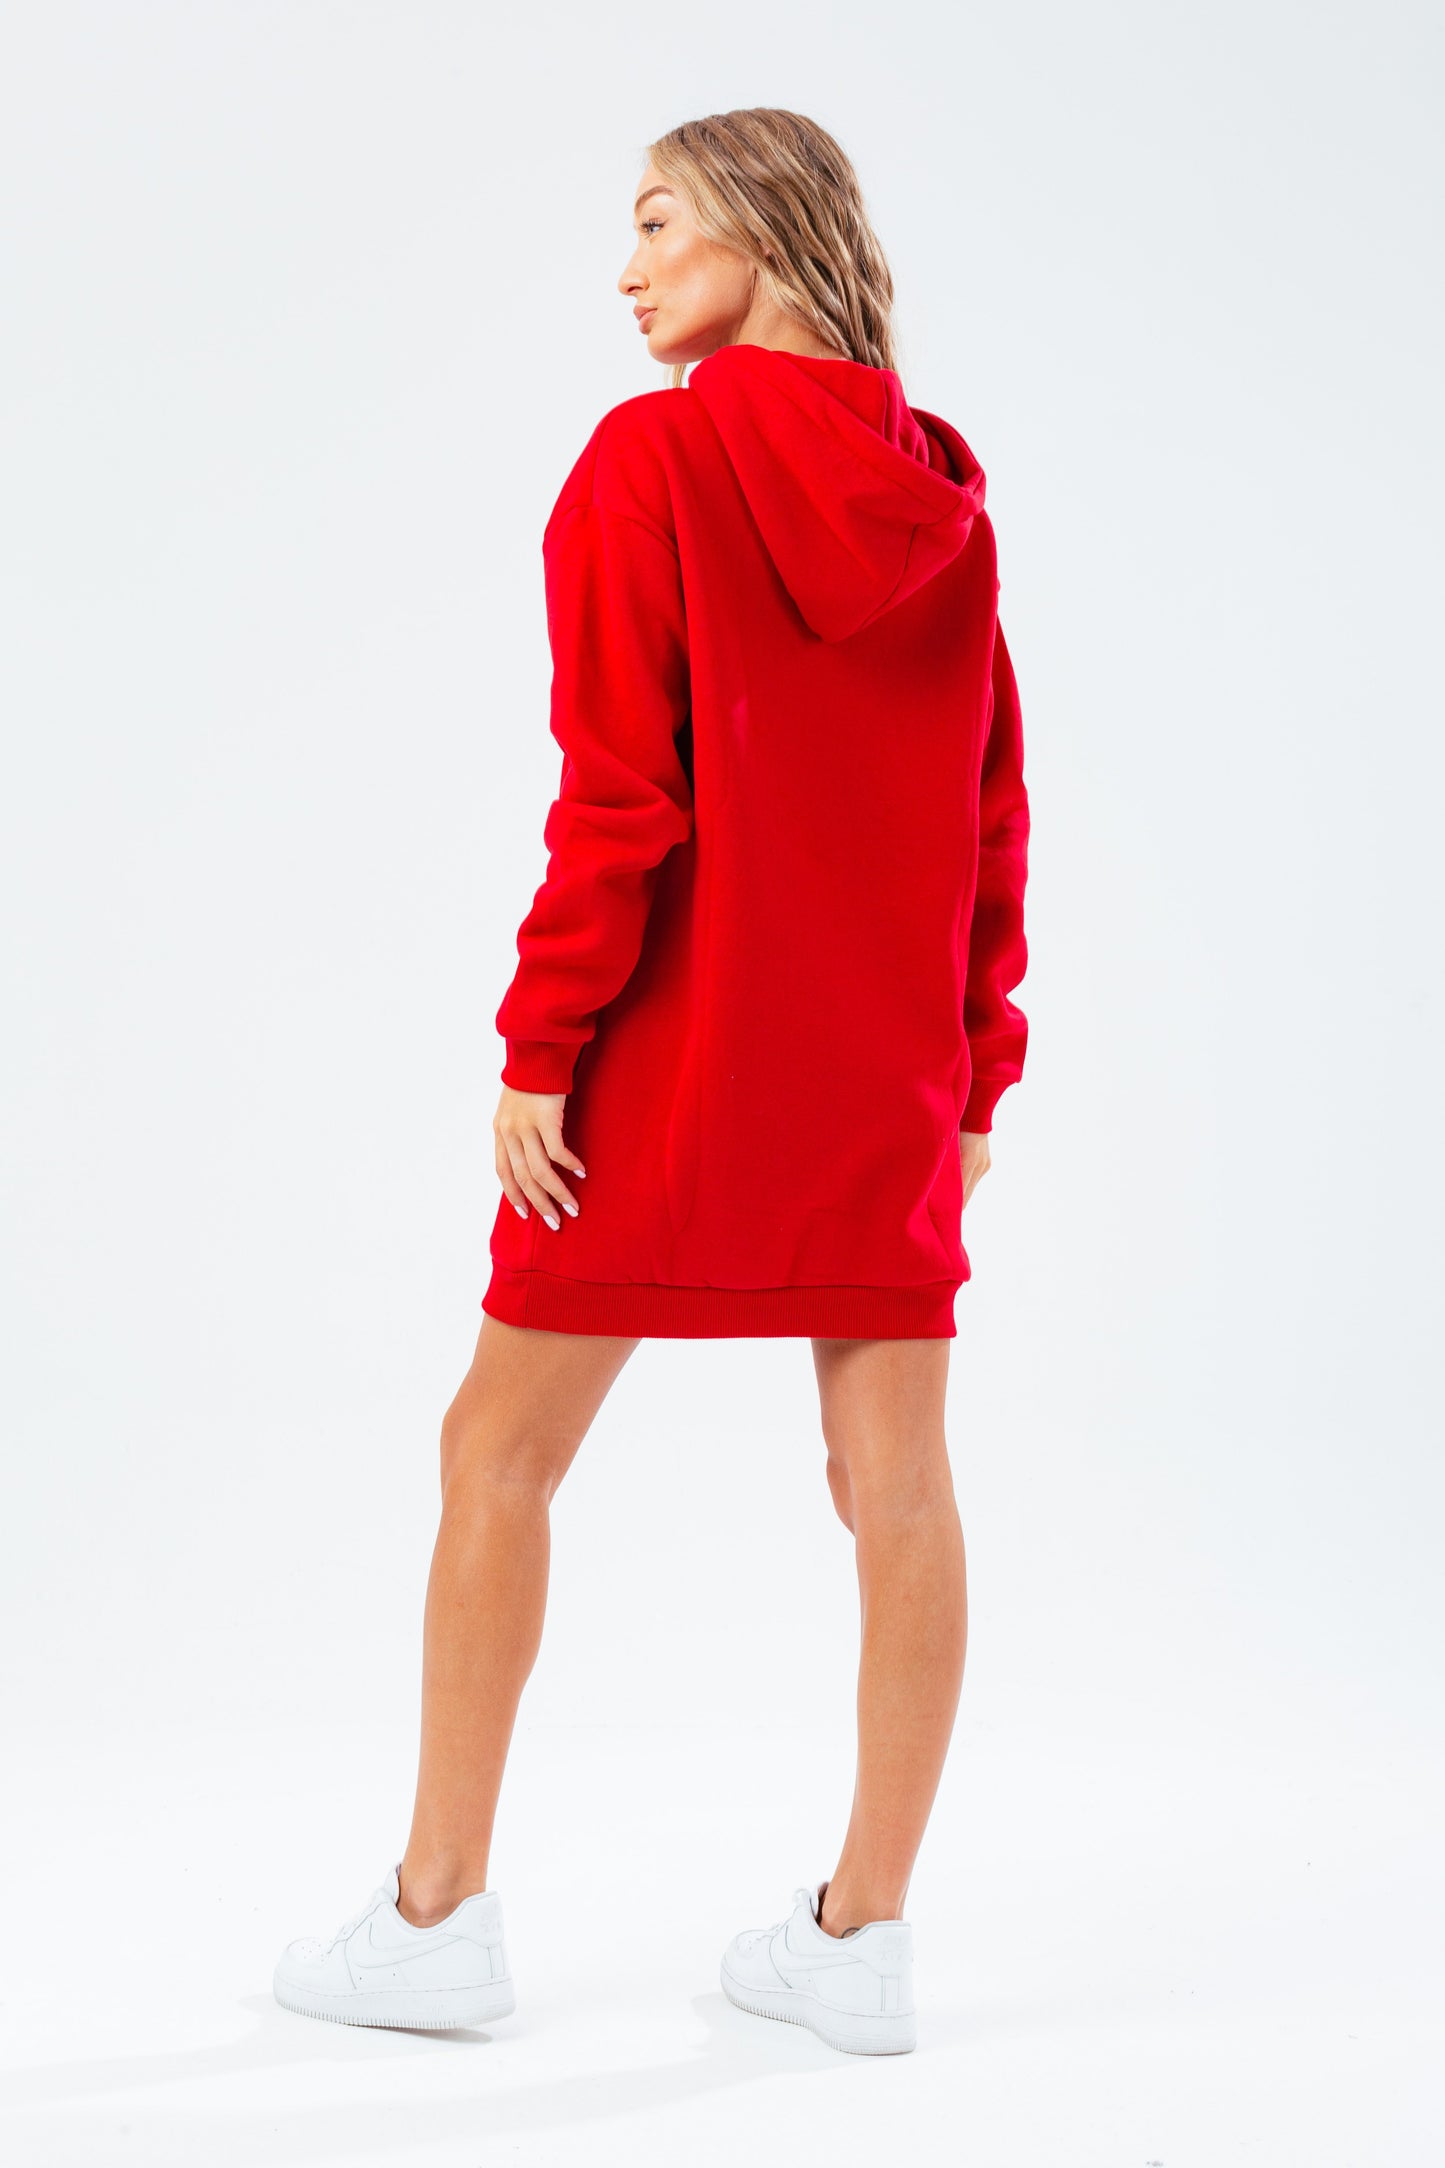 HYPE RED LONG LINE WOMEN'S PULLOVER HOODIE